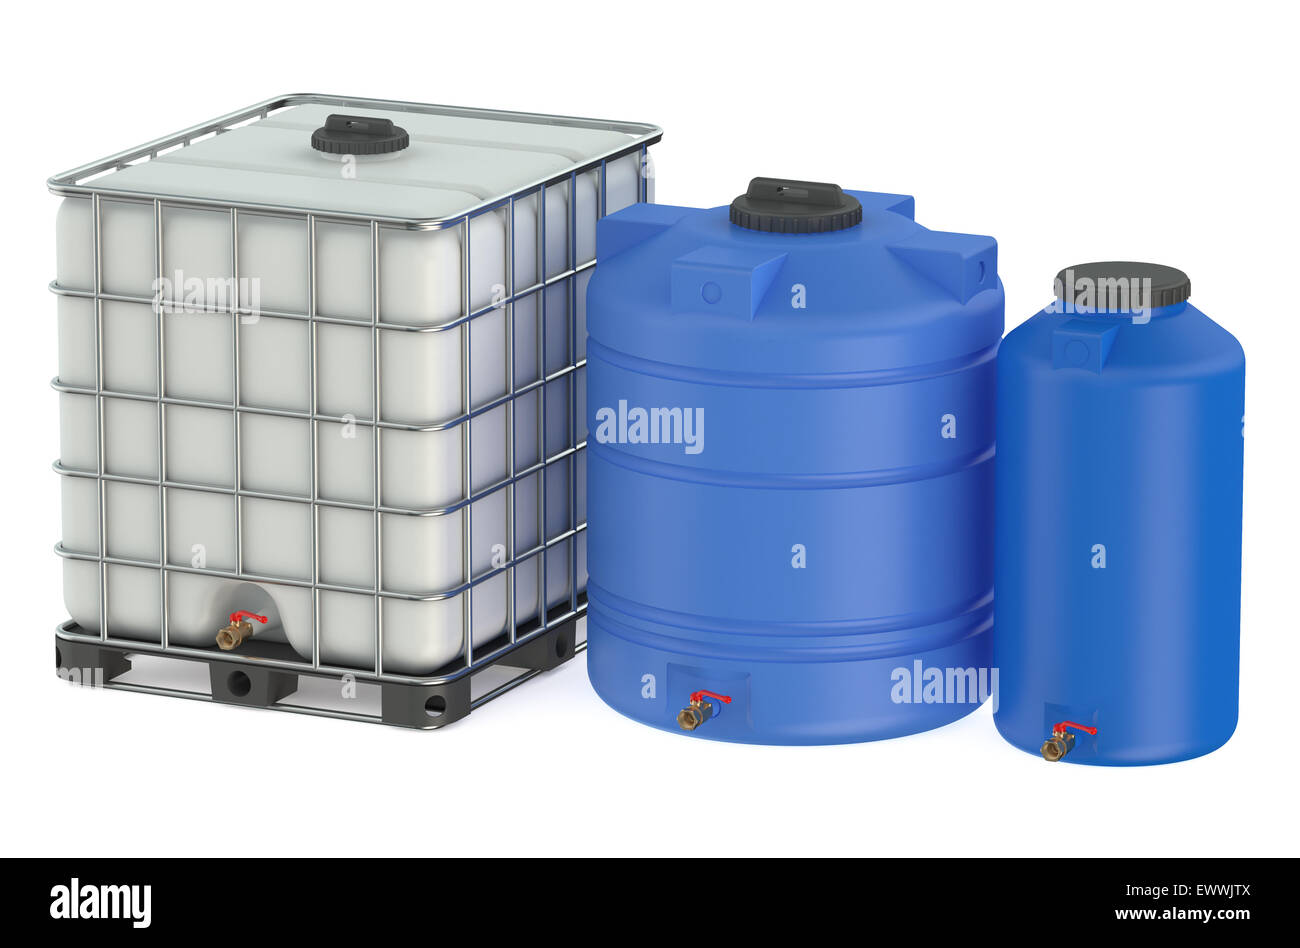 Water storage tanks Cut Out Stock Images & Pictures - Alamy